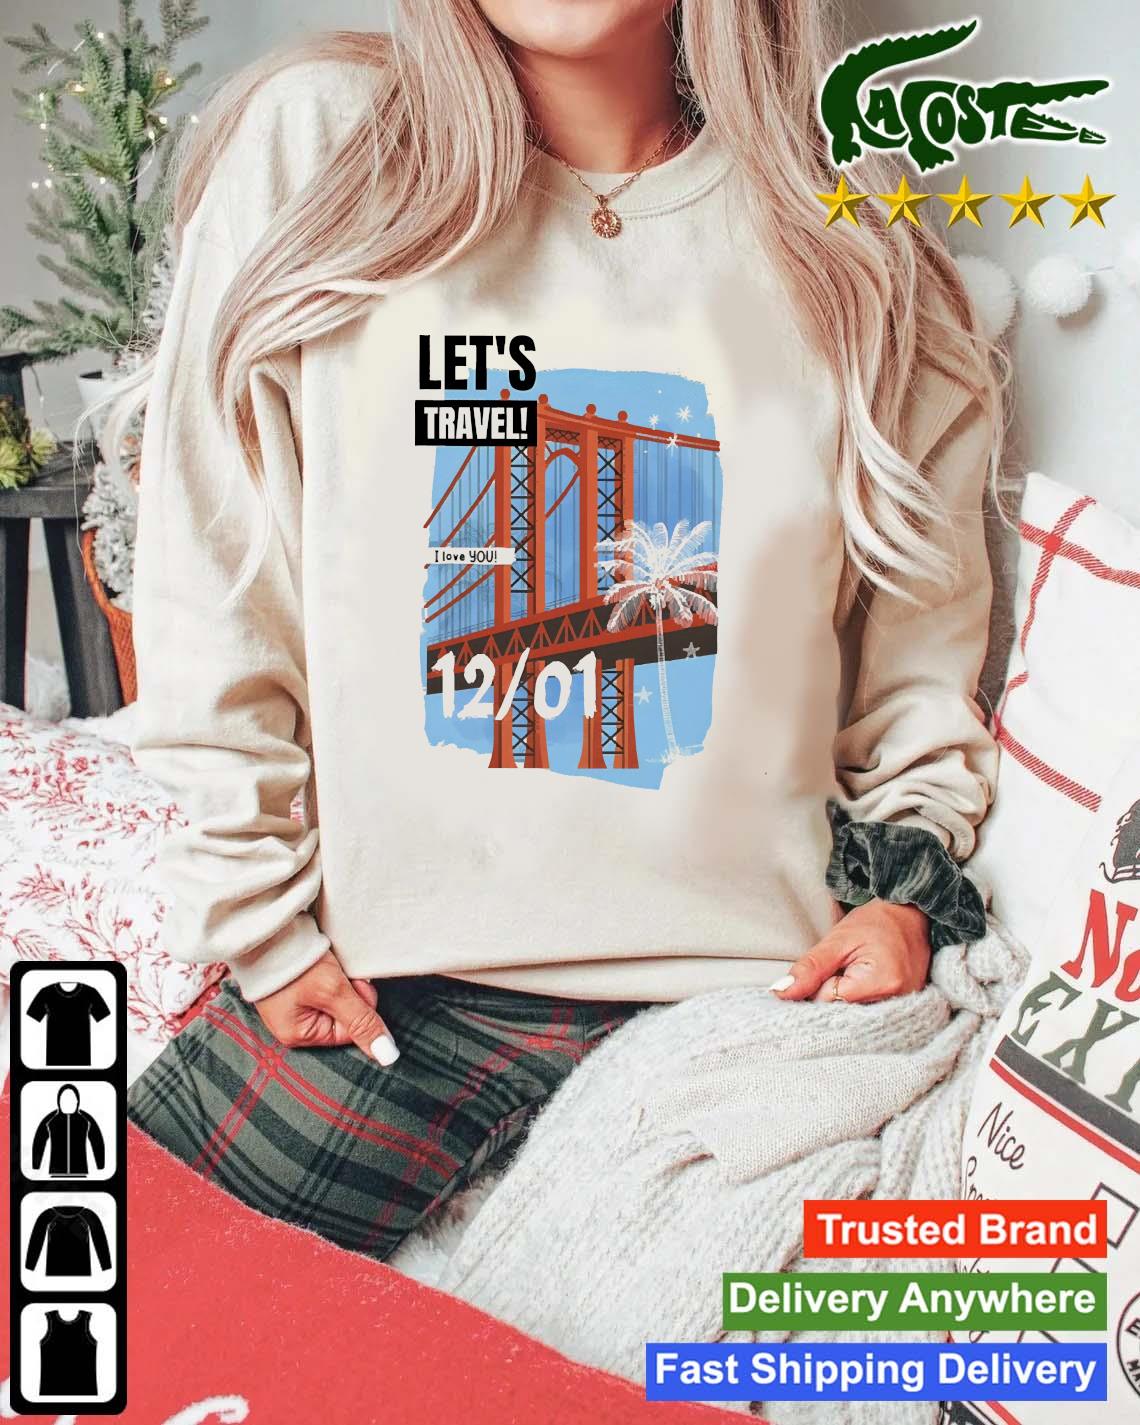 Let's Travel I Love You 12 01 Sweats Mockup Sweater